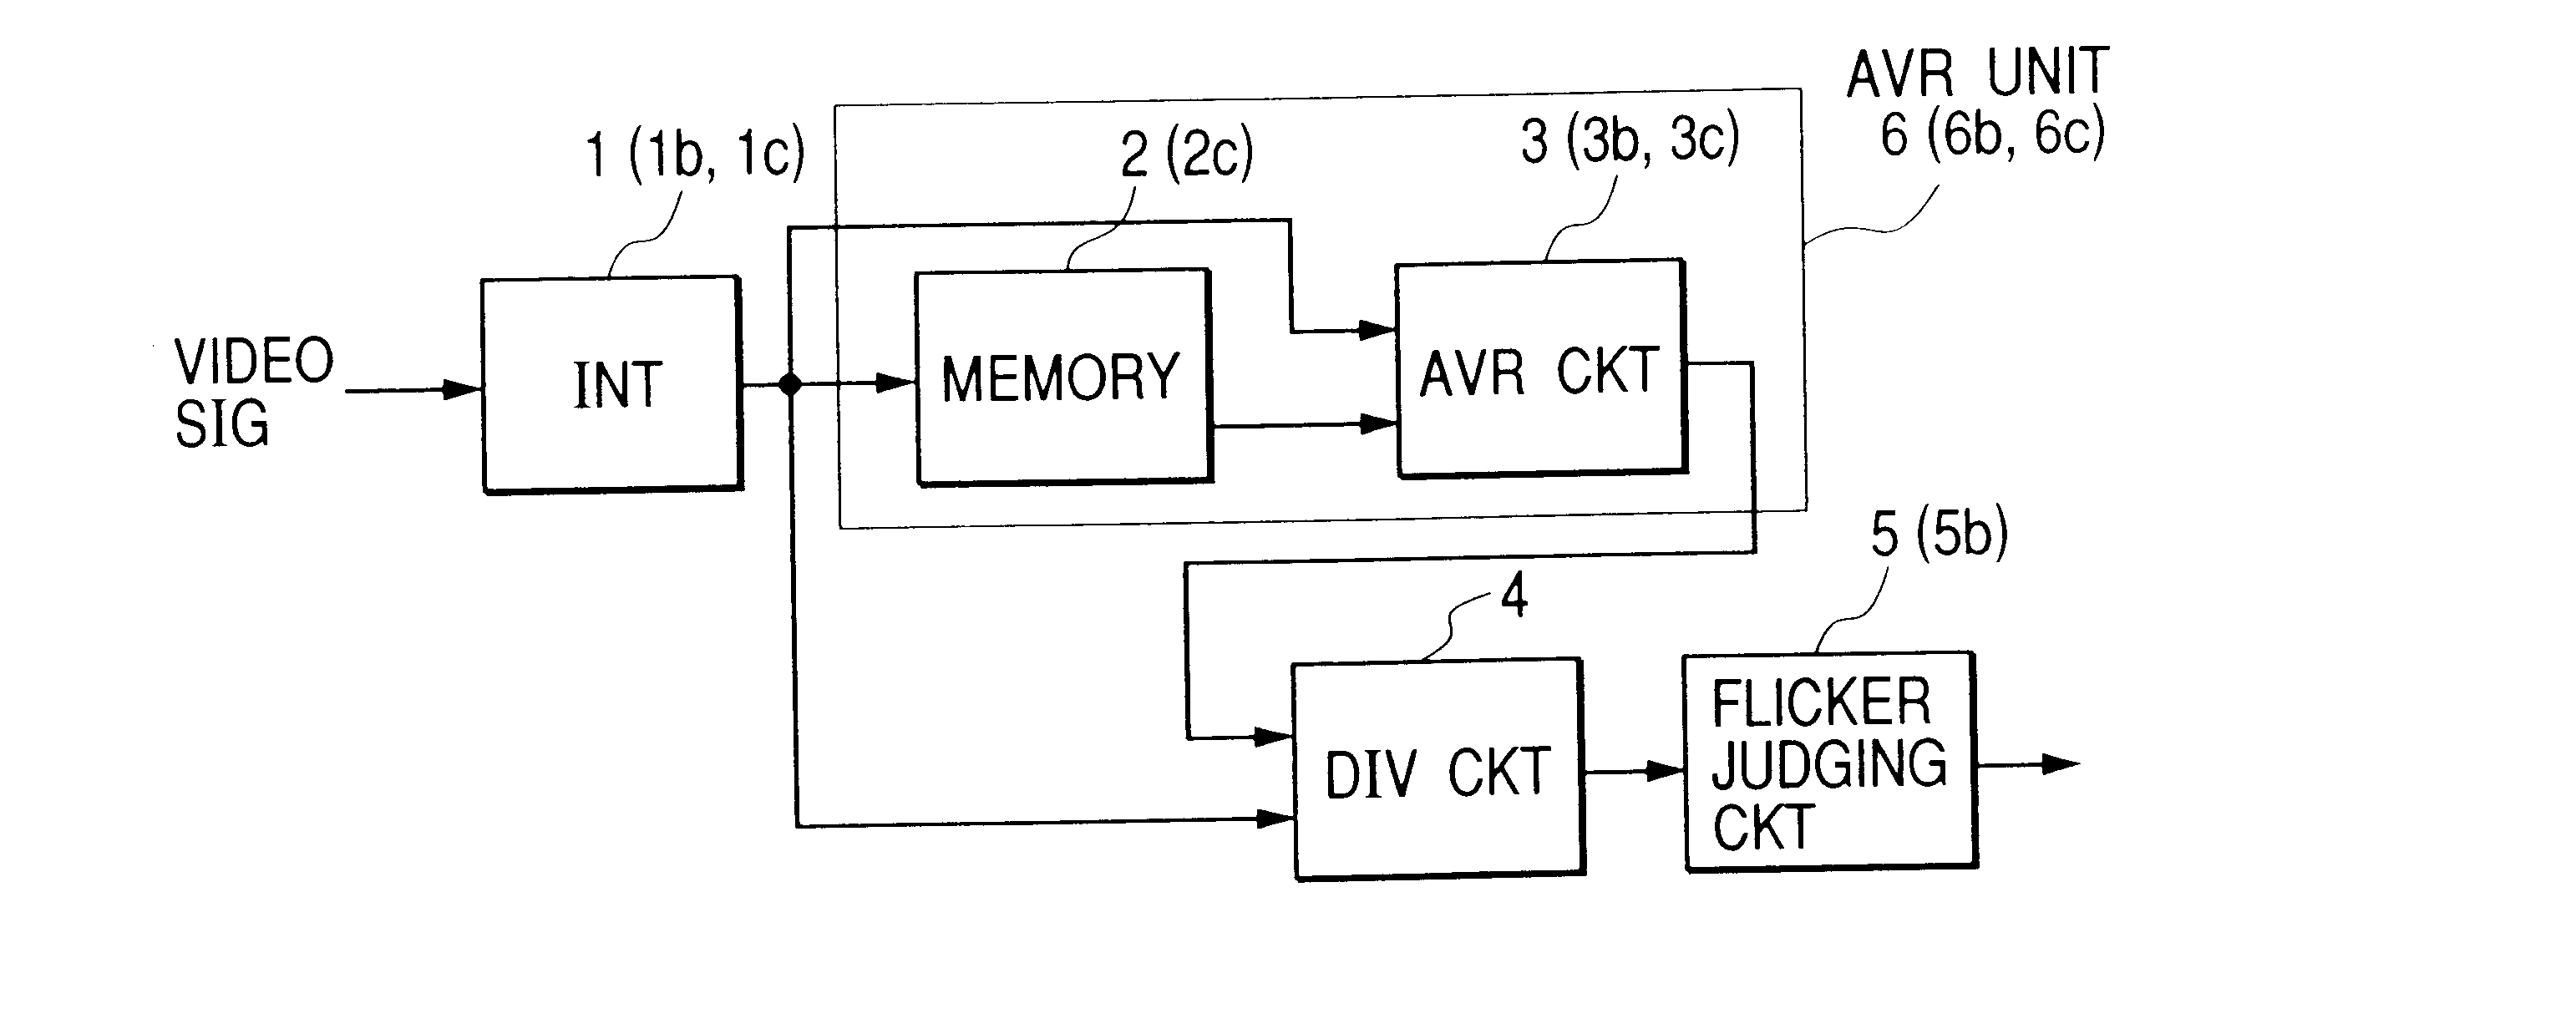 Illumination flicker detection apparatus, an illumination flicker compensation apparatus, and an ac line frequency detection apparatus, methods of detecting illumination flicker, compensating illumination flicker, and measuring ac line frequency